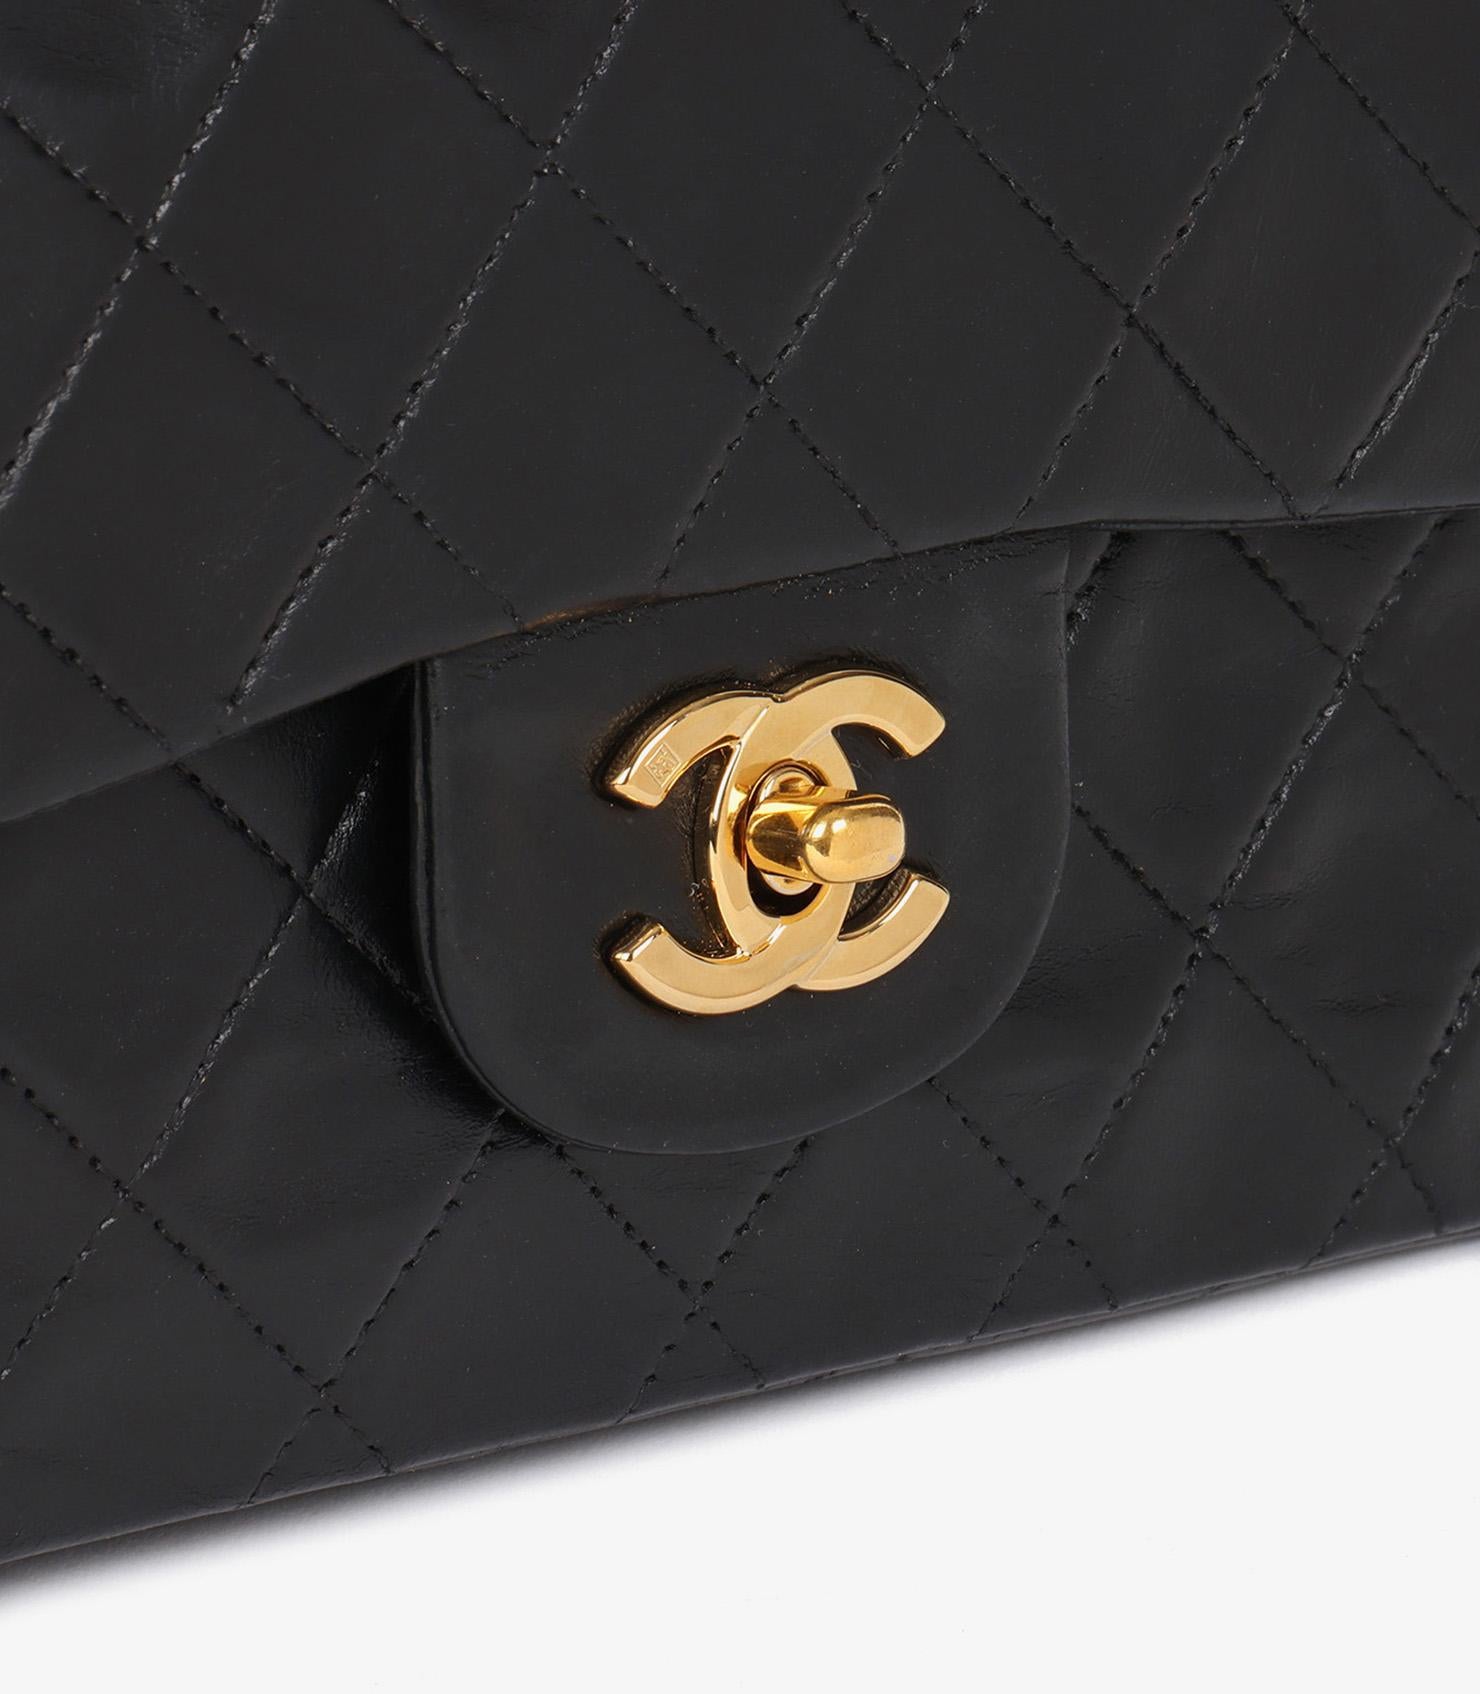 CHANEL Black Quilted Lambskin Vintage Small Classic Double Flap Bag 4